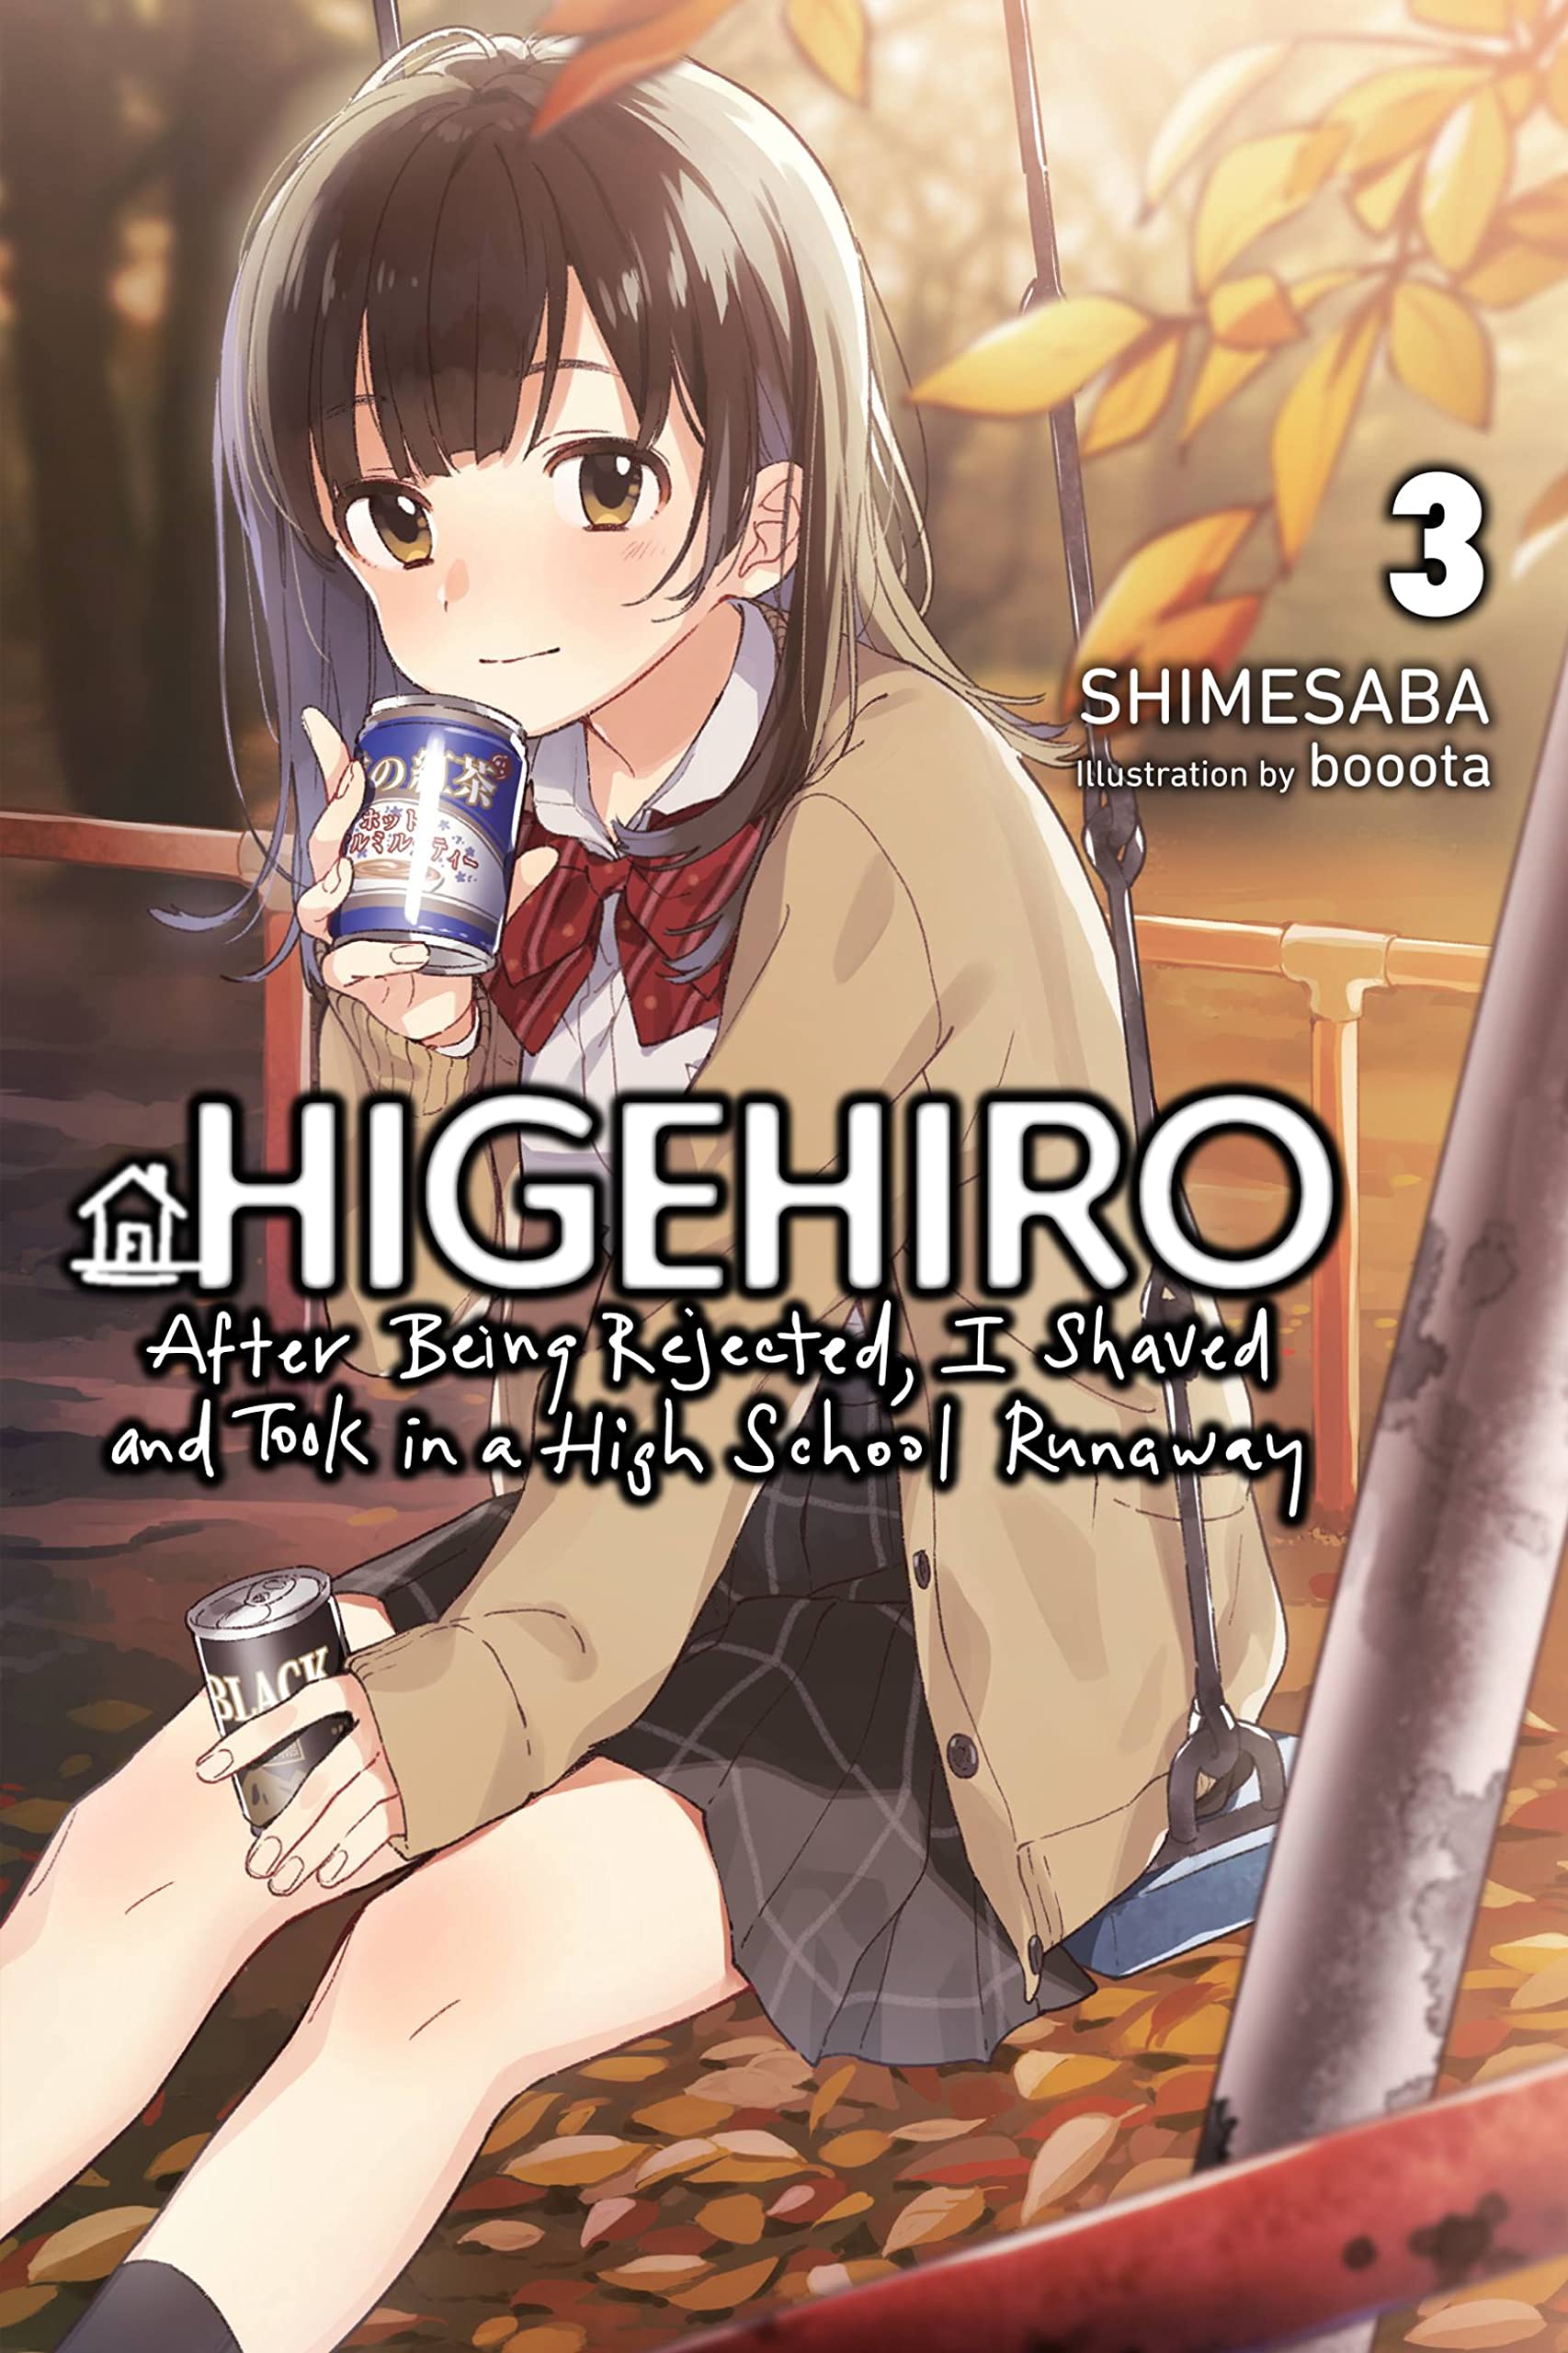 Higehiro: After Getting Rejected, I Shaved and Took in a High School Runaway Vol. 03 (Light Novel)